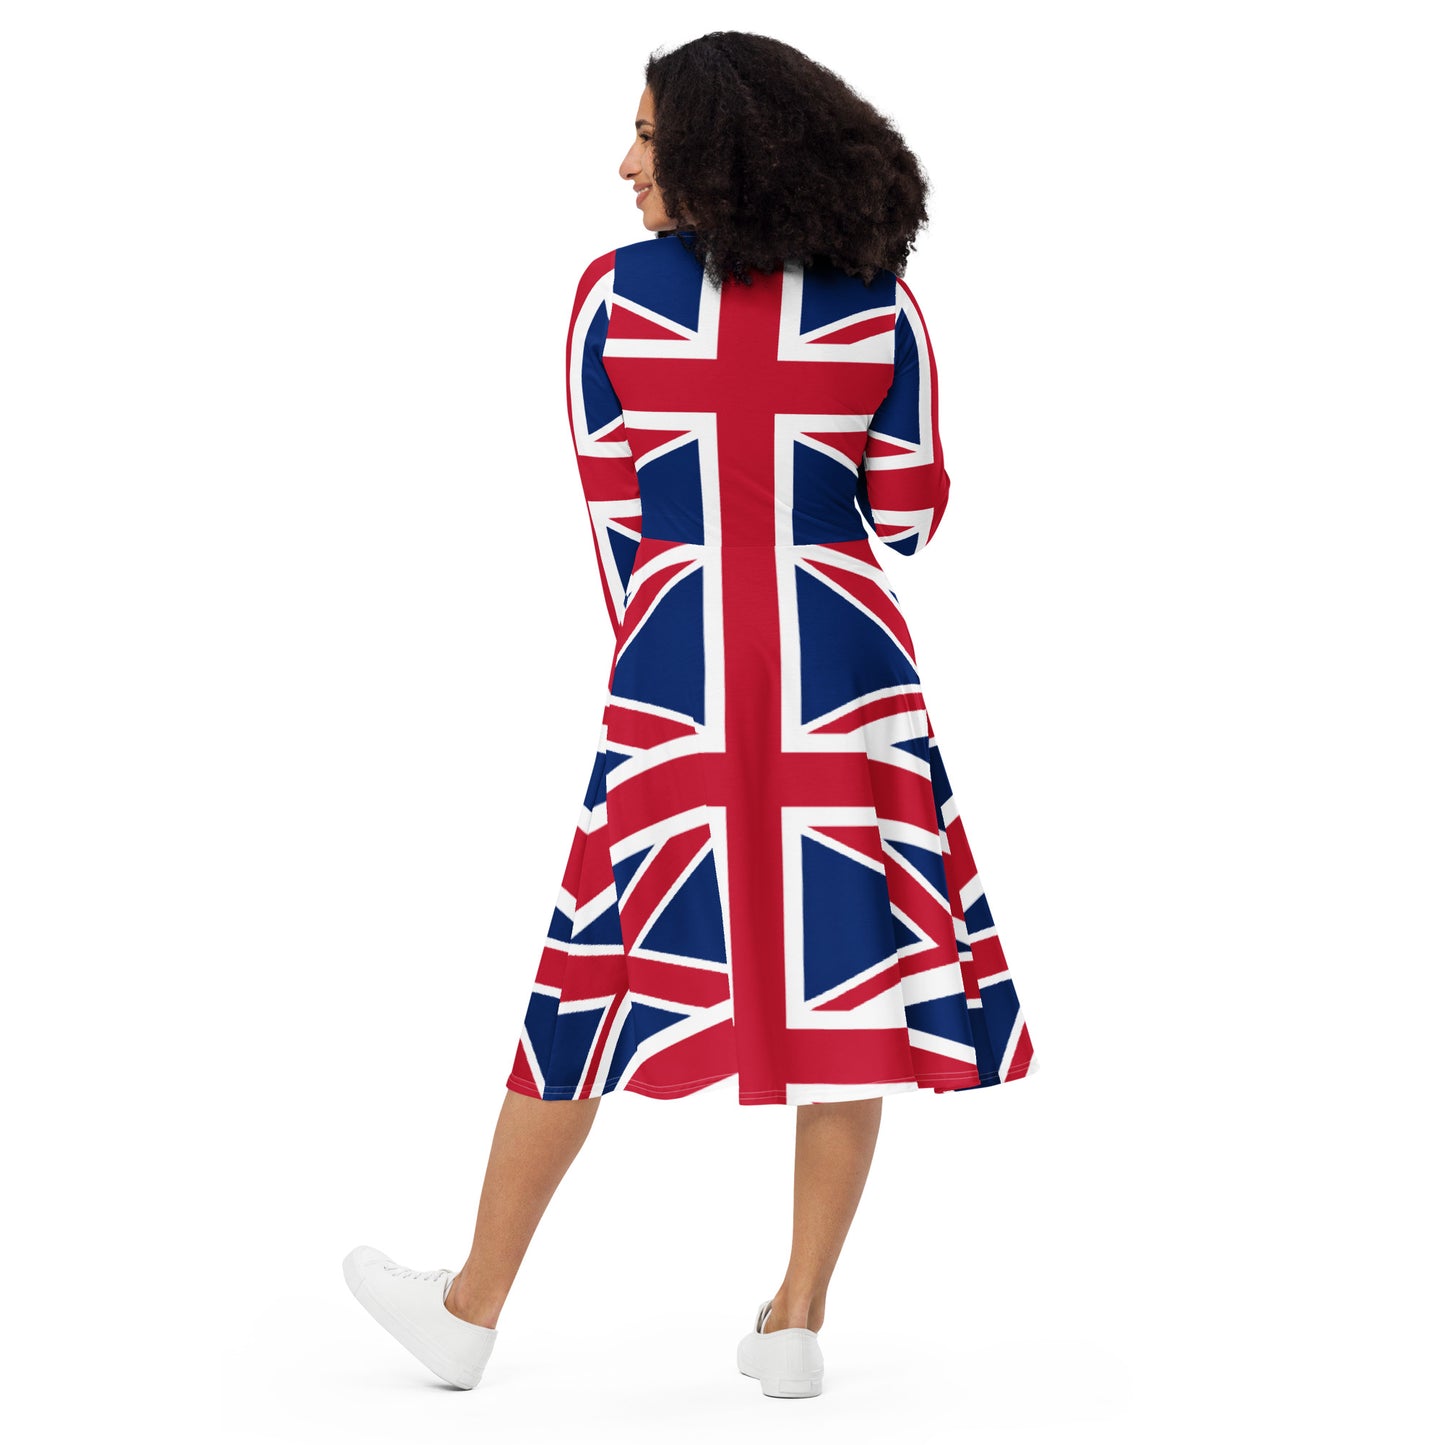 Union Jack Dress / Long Sleeve Dress With Pockets / Sizes from 2XS to 6XL